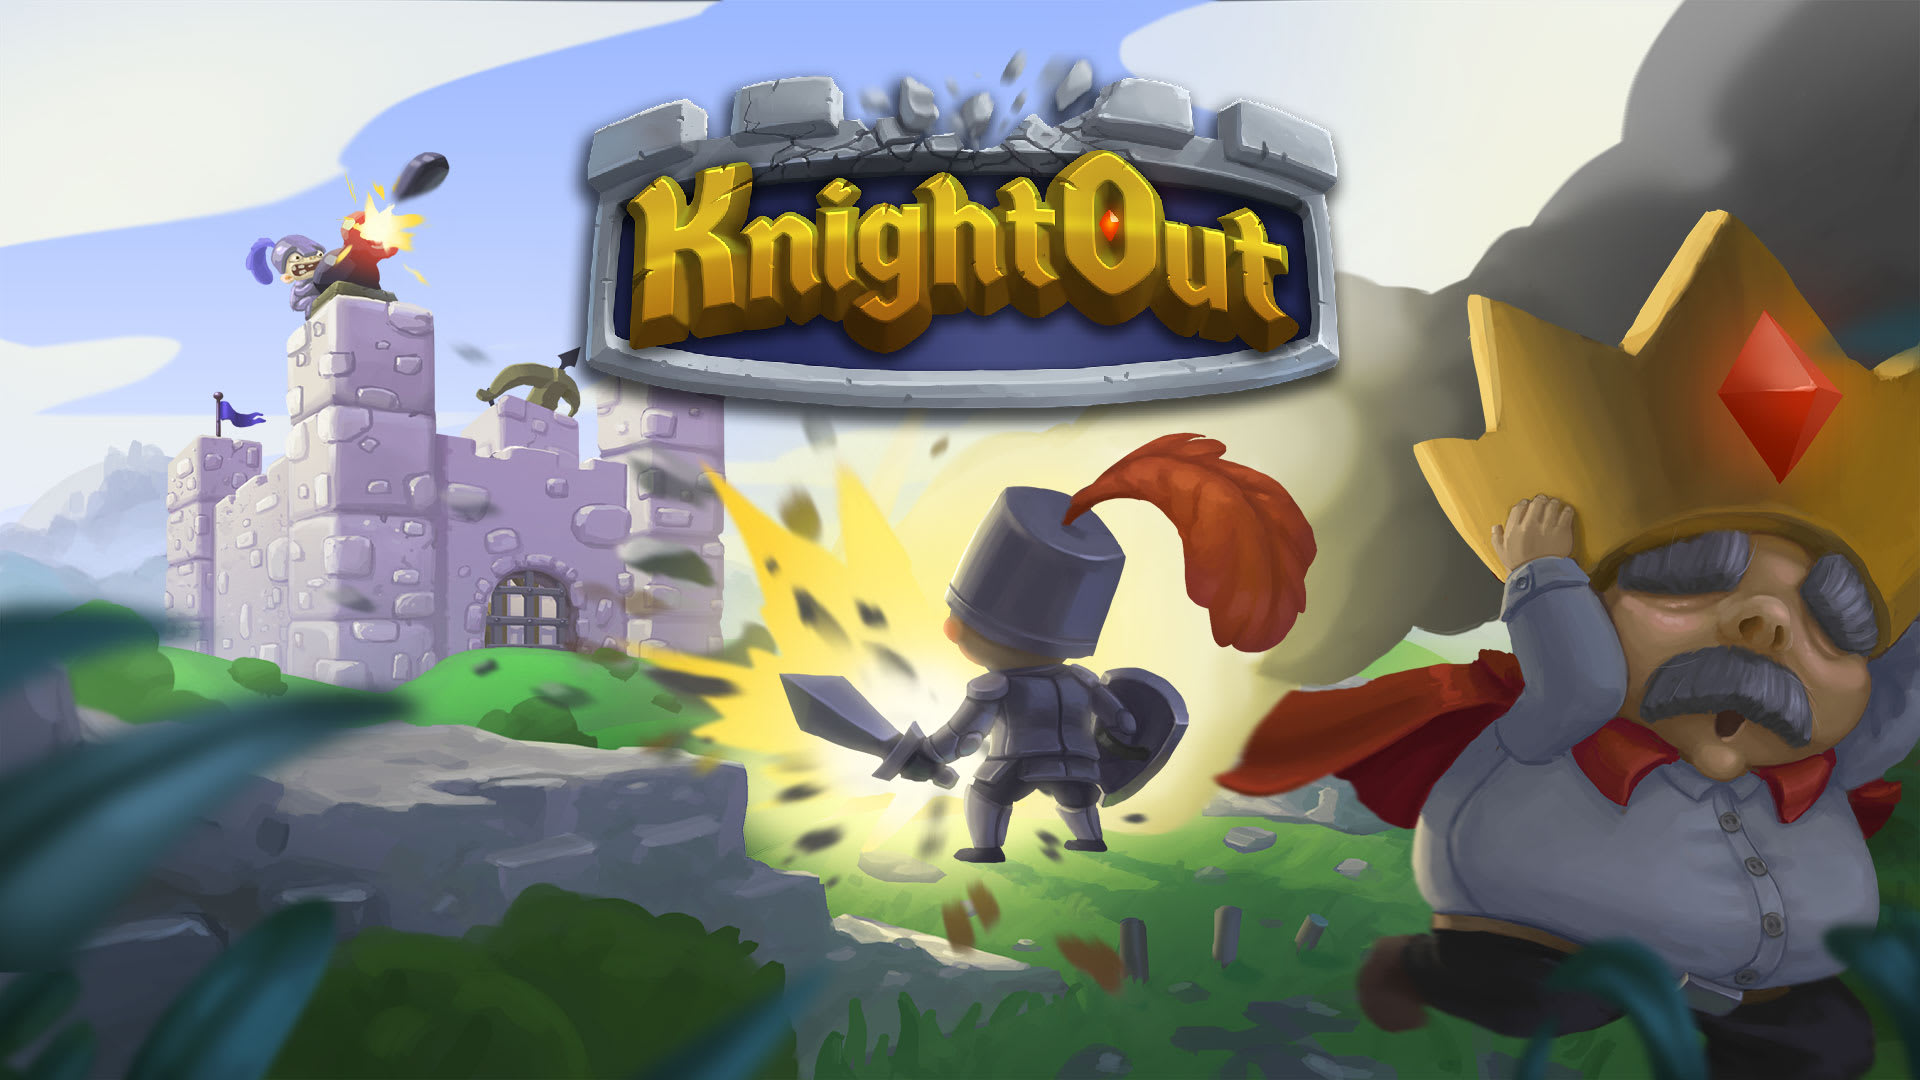 KnightOut is a local party brawler for 1-4 players! Play with or against your friends in a frantic battle. Half the battle is won by building an epic castle with deadly weapons and traps.